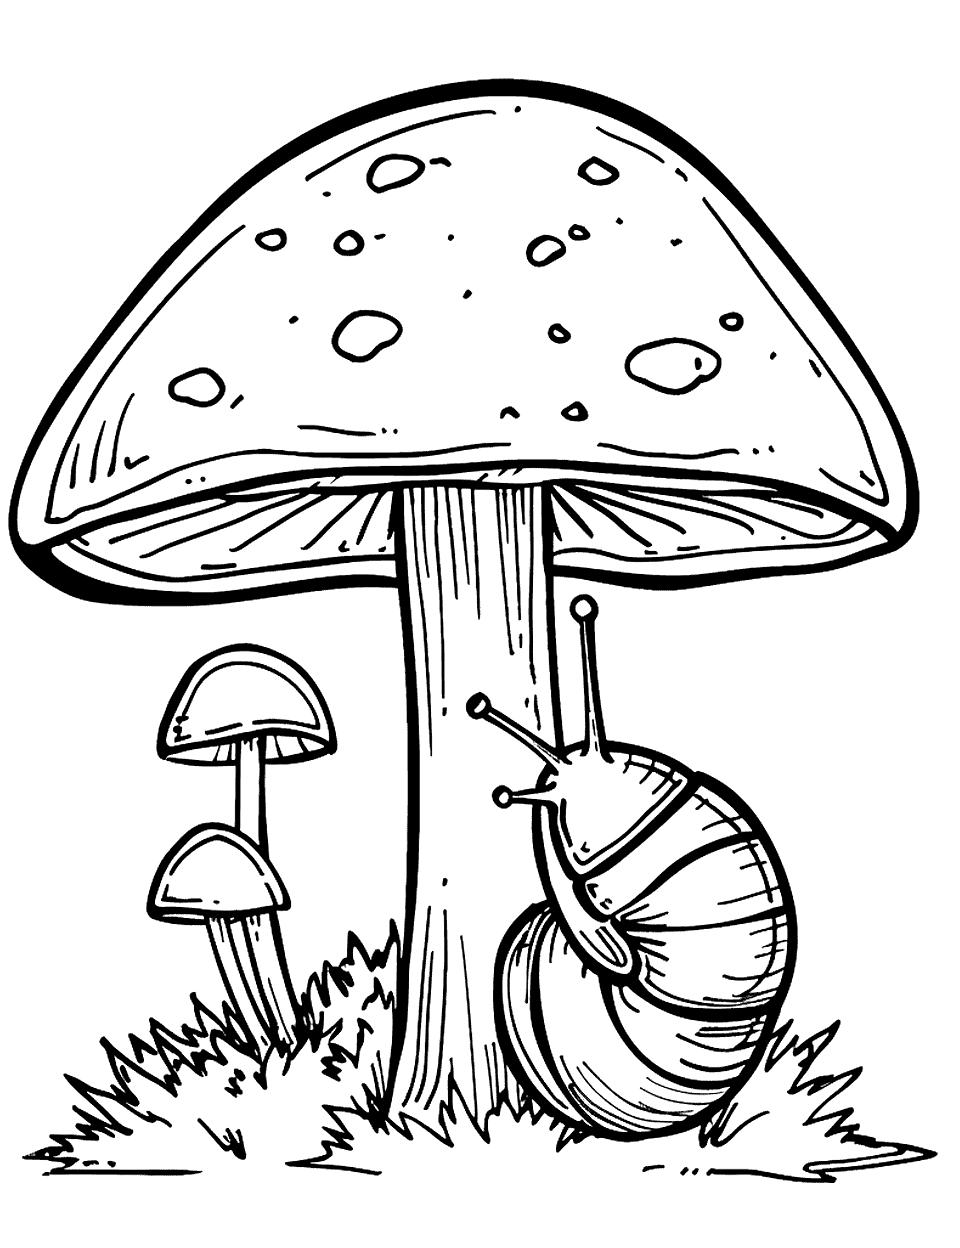 Mushroom and Snail Coloring Page - A snail slowly crawls up the side of a mushroom.